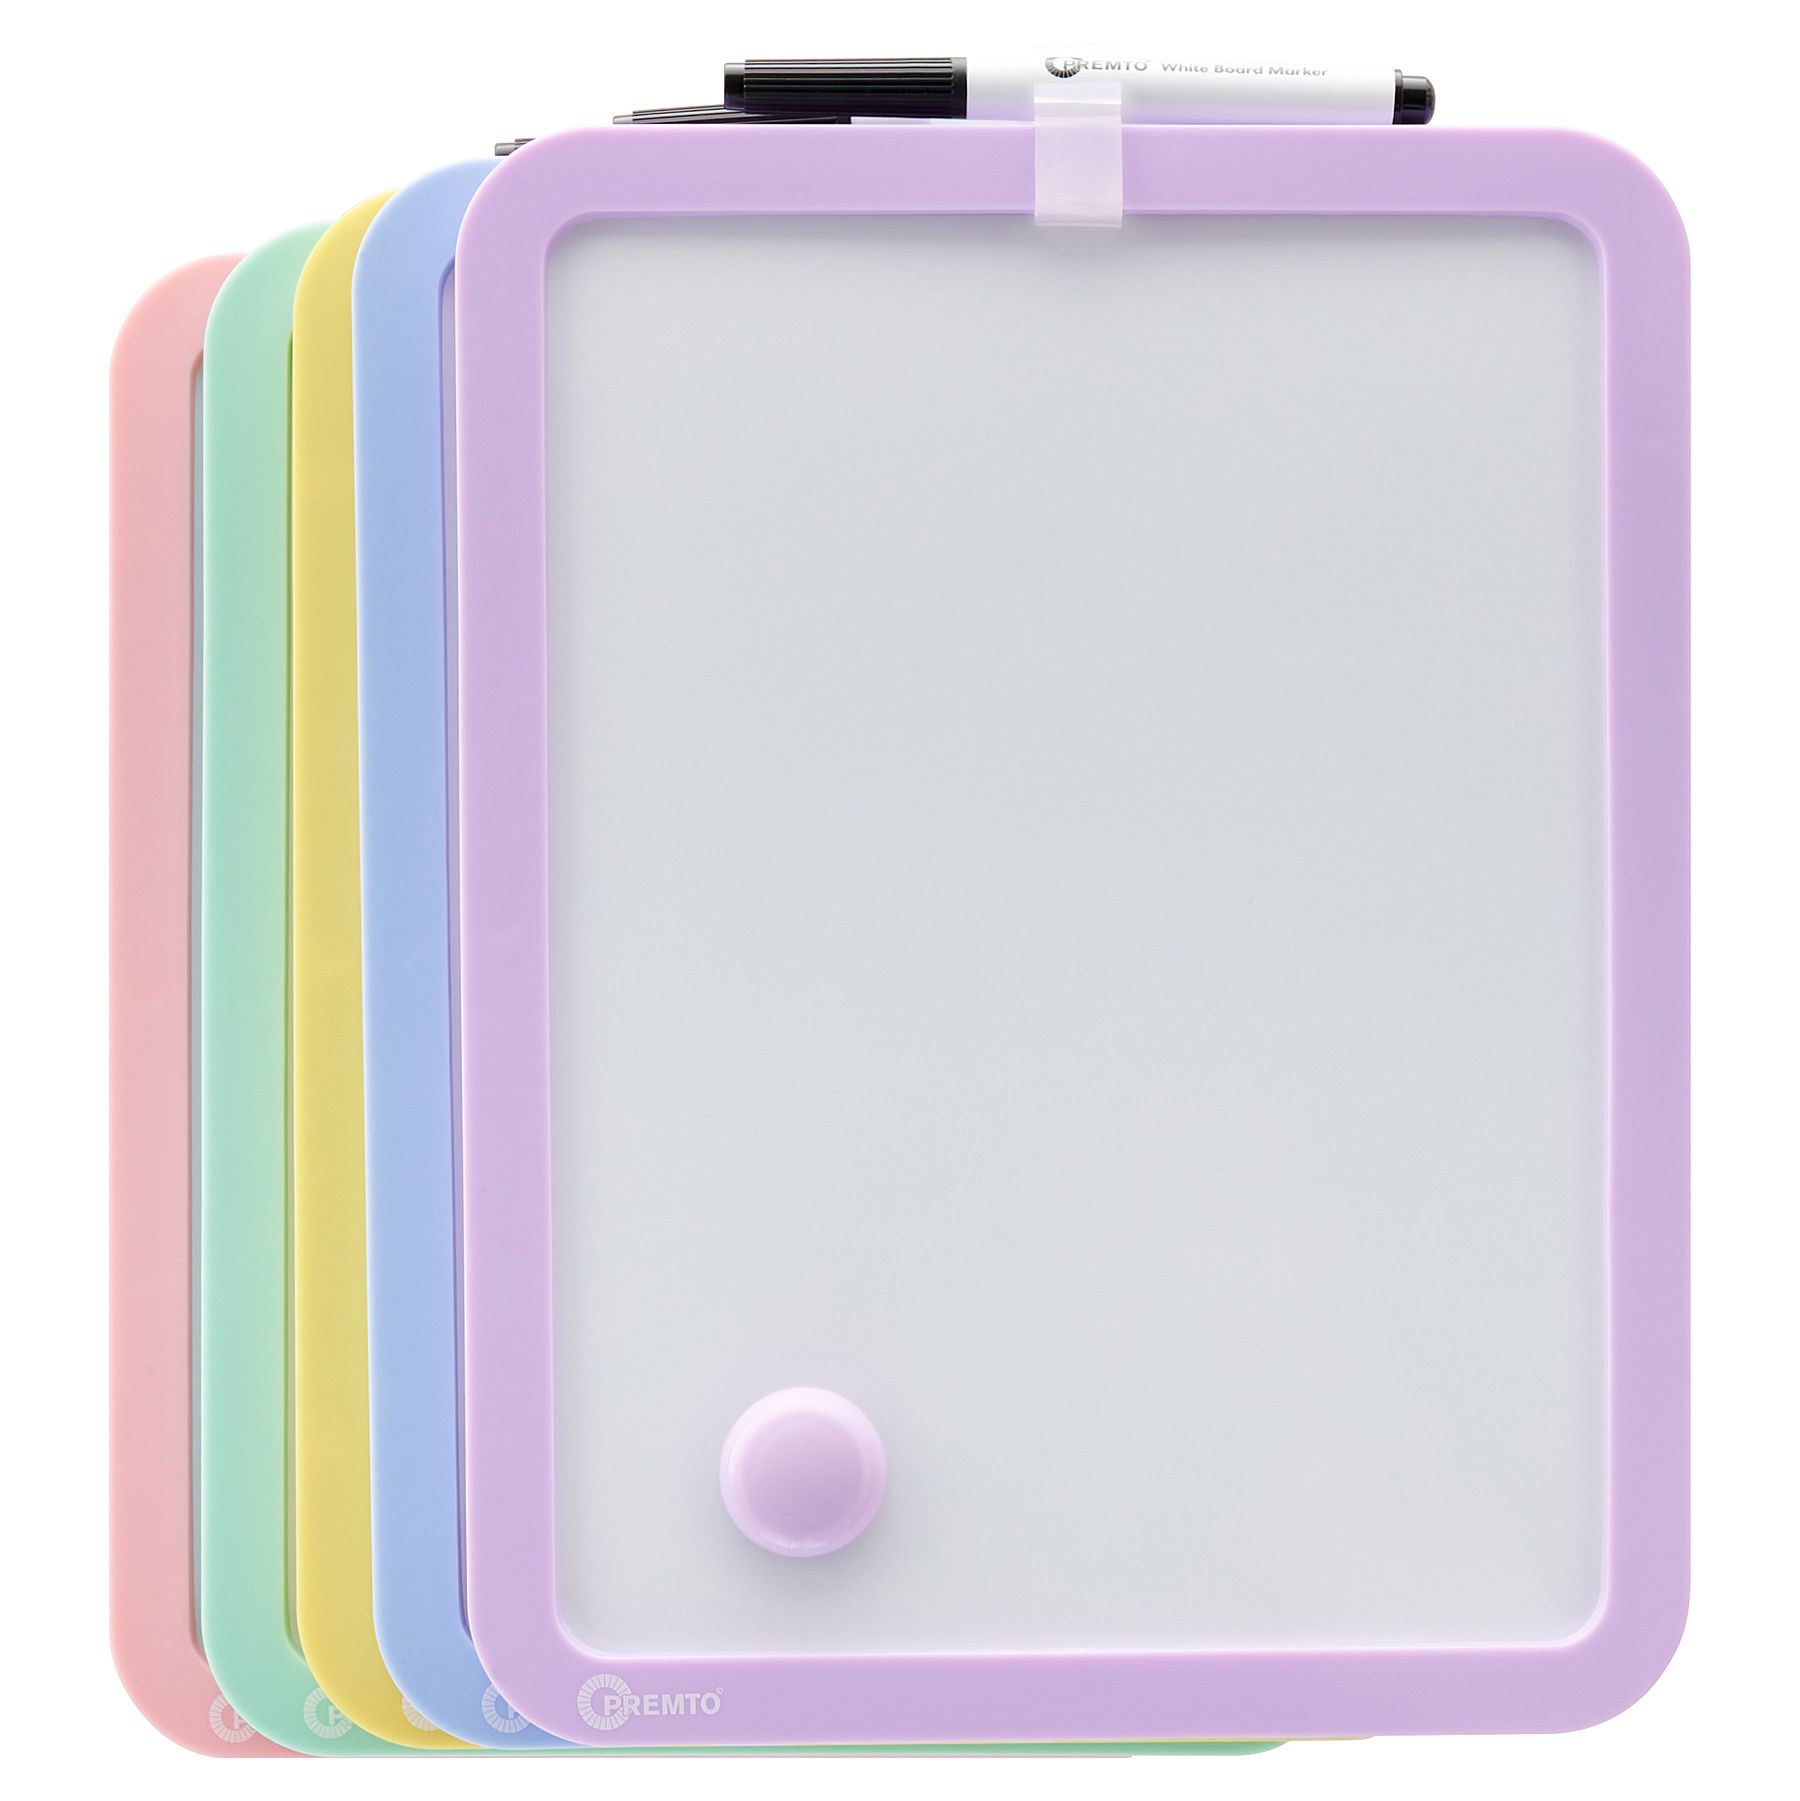 Pastel Magnetic Dry Wipe Whiteboard With Dry Erase Marker